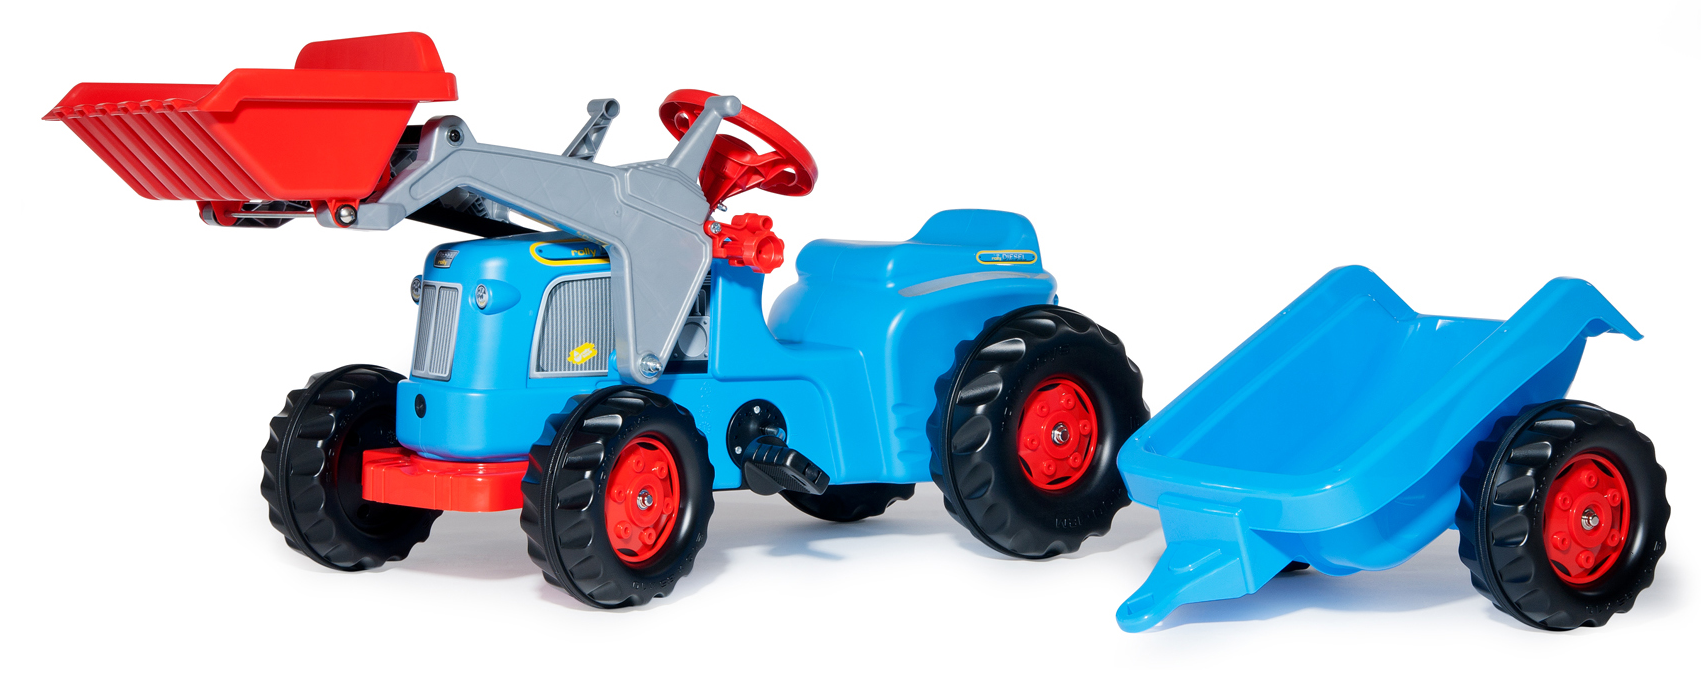 Kiddy Classic Lader + Anhänger blau/rot